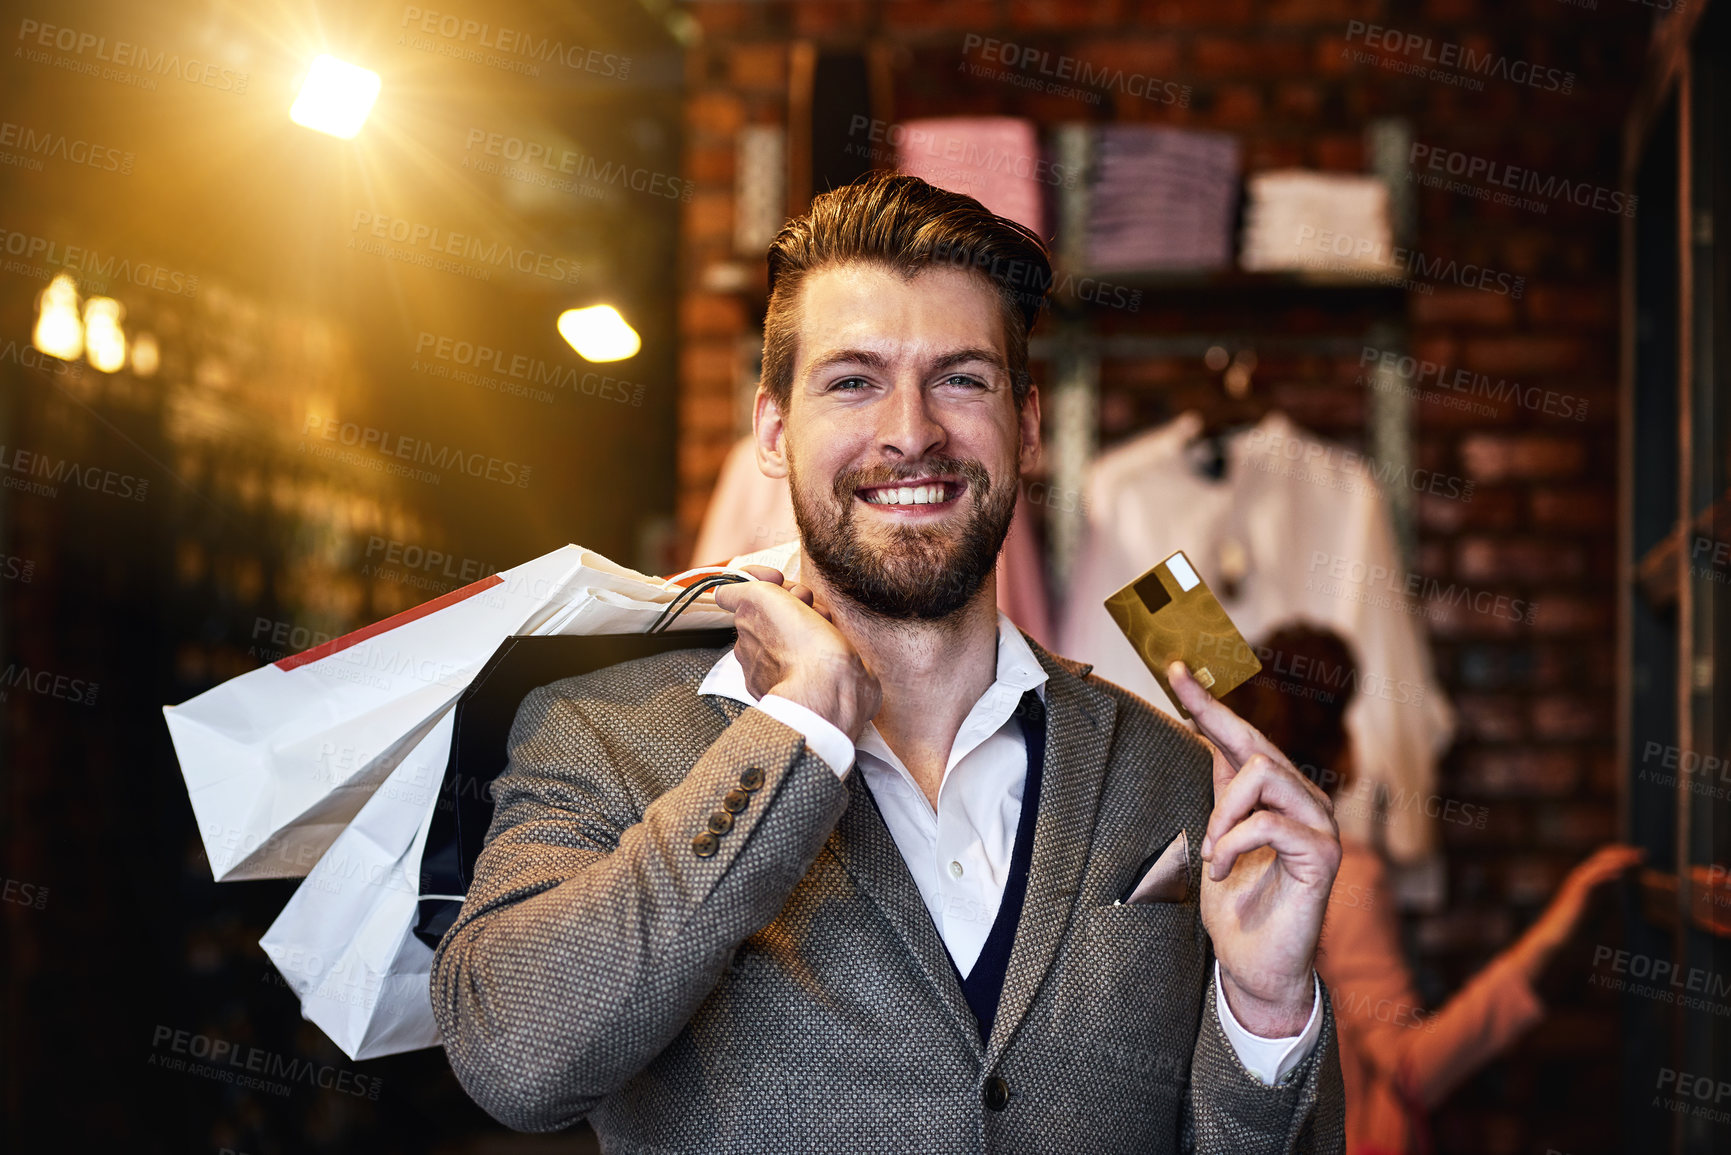 Buy stock photo Shot of a man holding up his credit card while out shopping